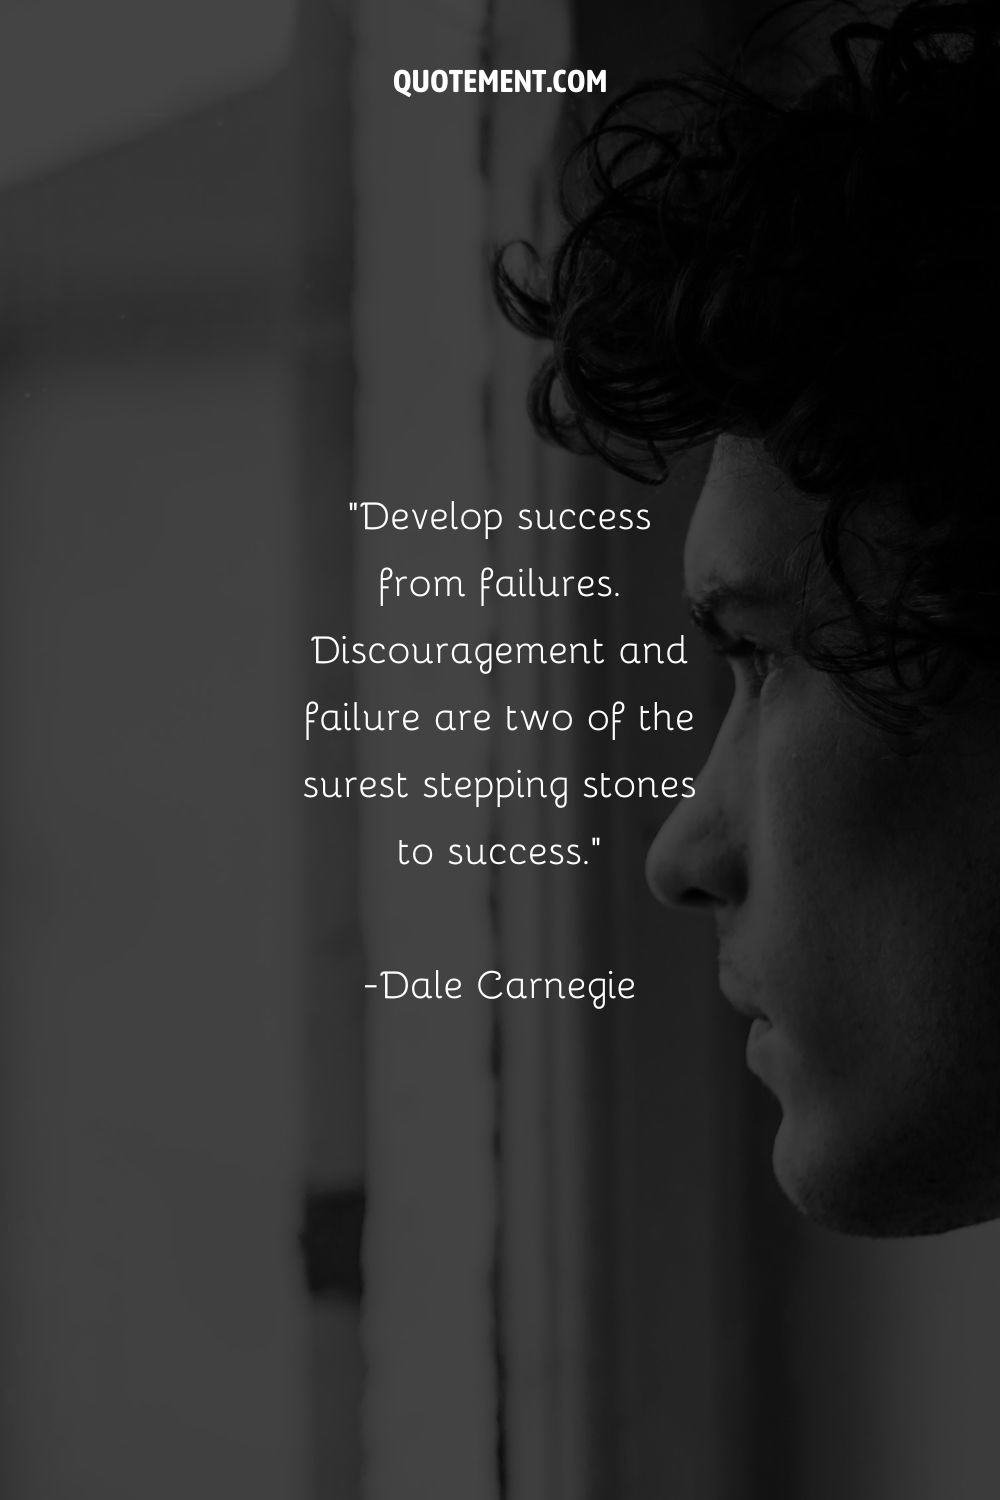 “Develop success from failures. Discouragement and failure are two of the surest stepping stones to success.” — Dale Carnegie